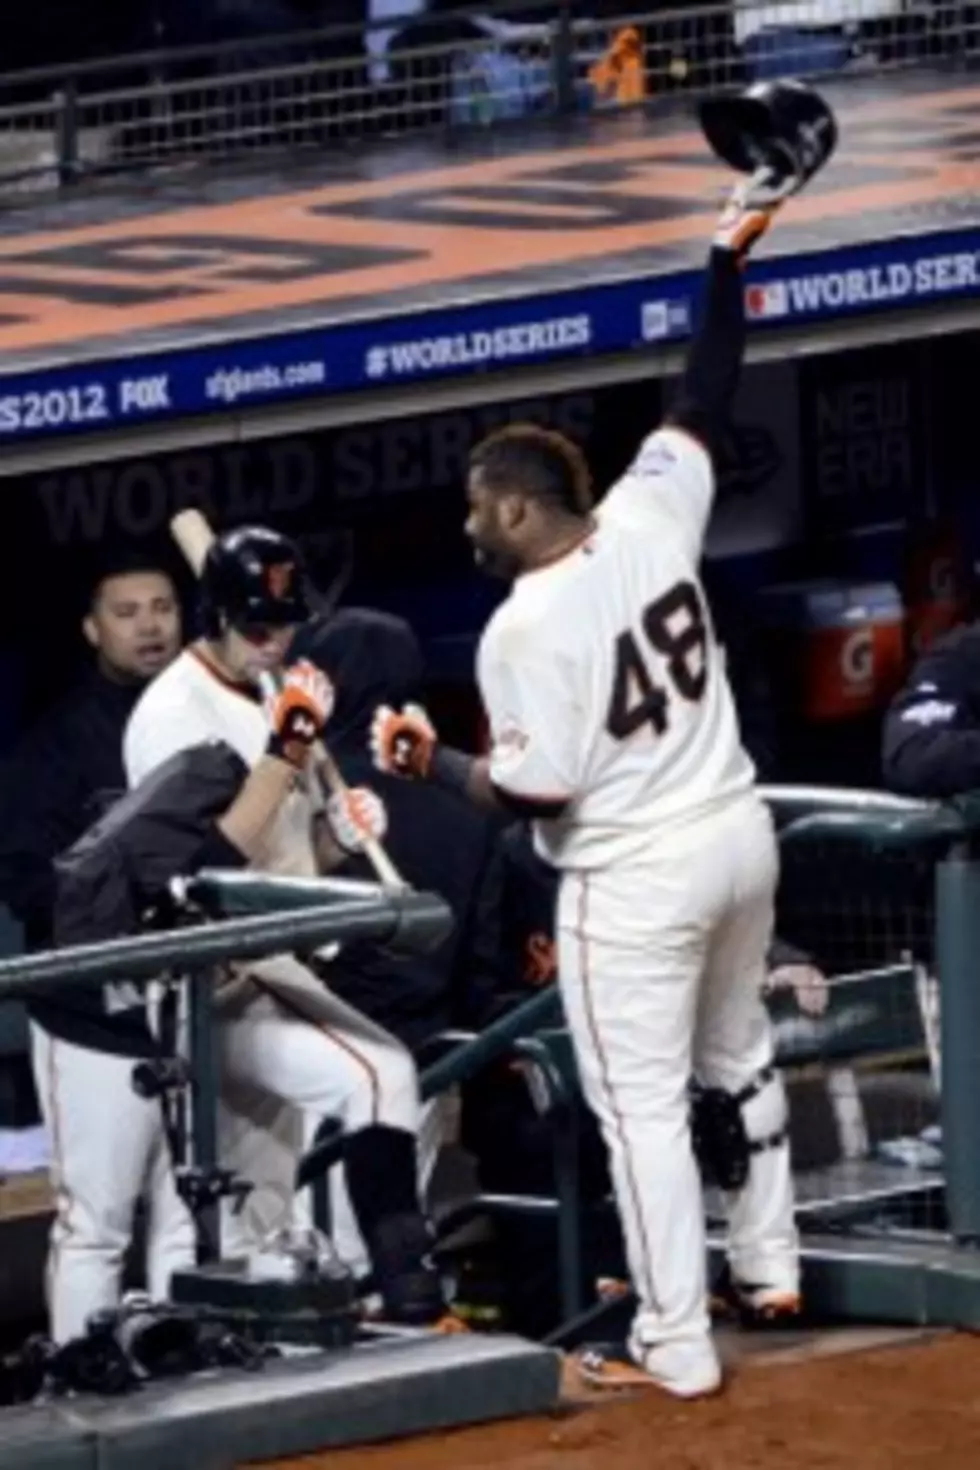 Giants Top Tigers In Game 1 Behind Sandoval&#8217;s 3 Home Runs